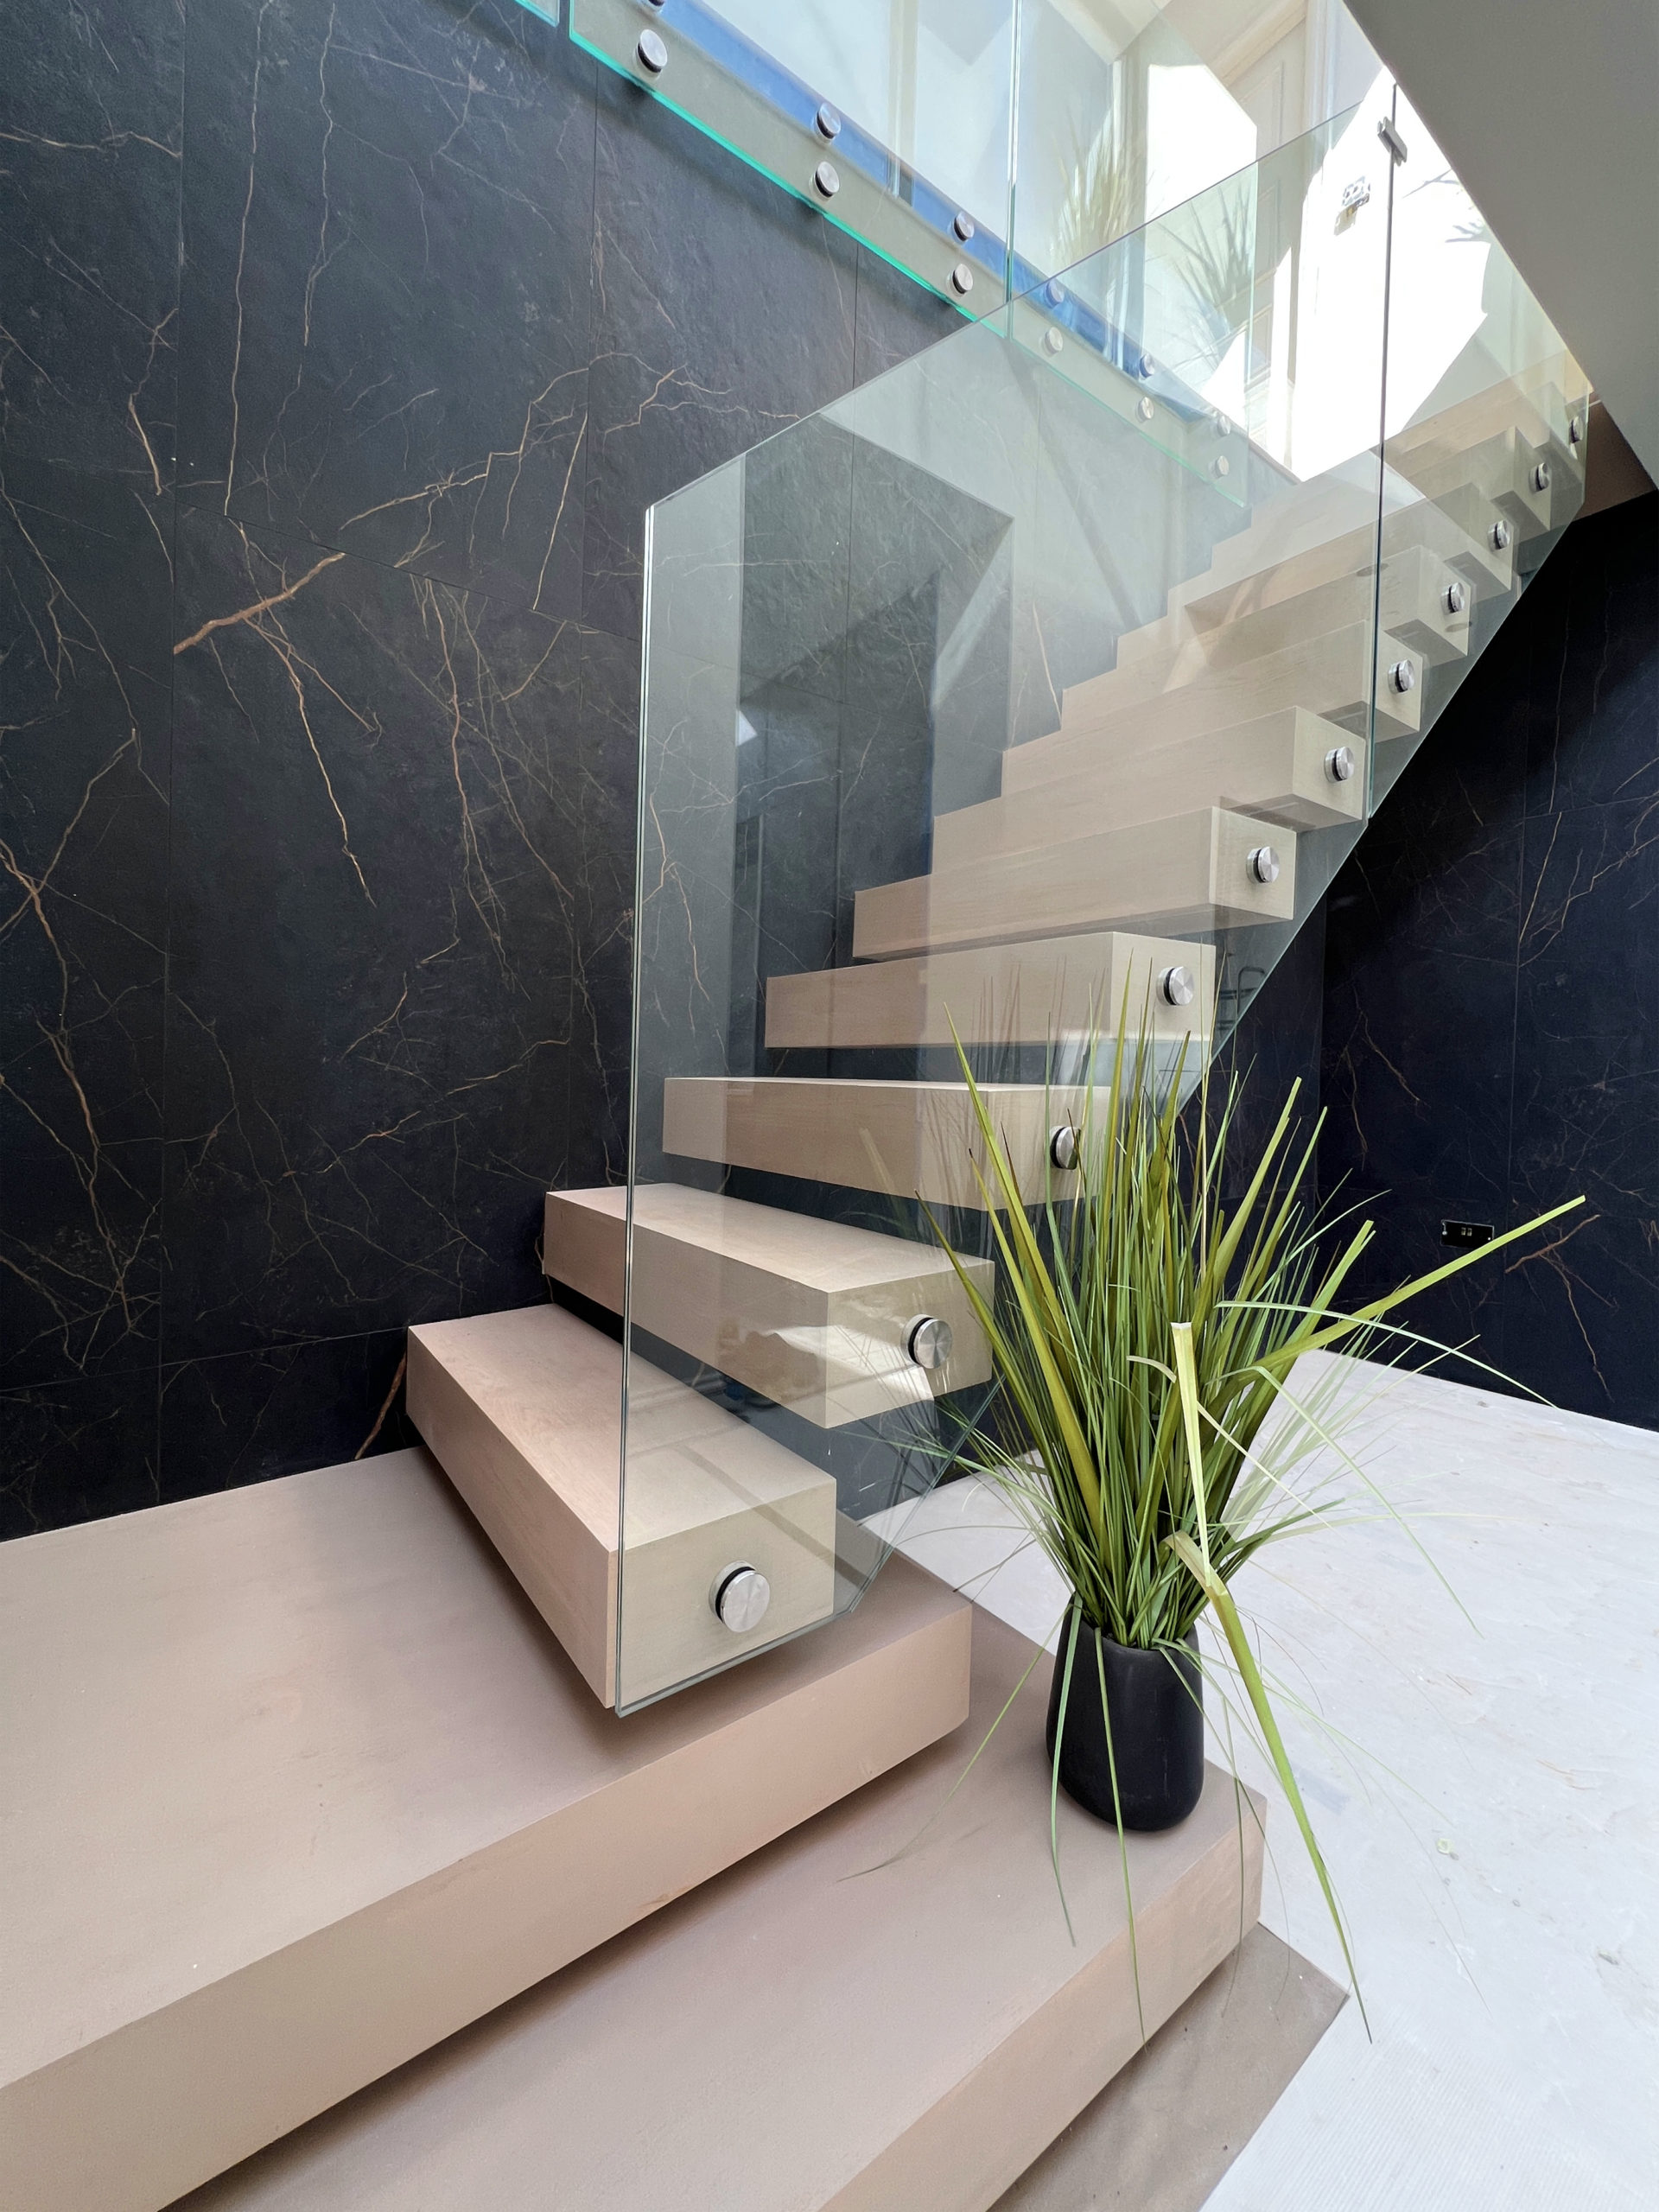 Floating staircase with glass balustrade, oak stair treads